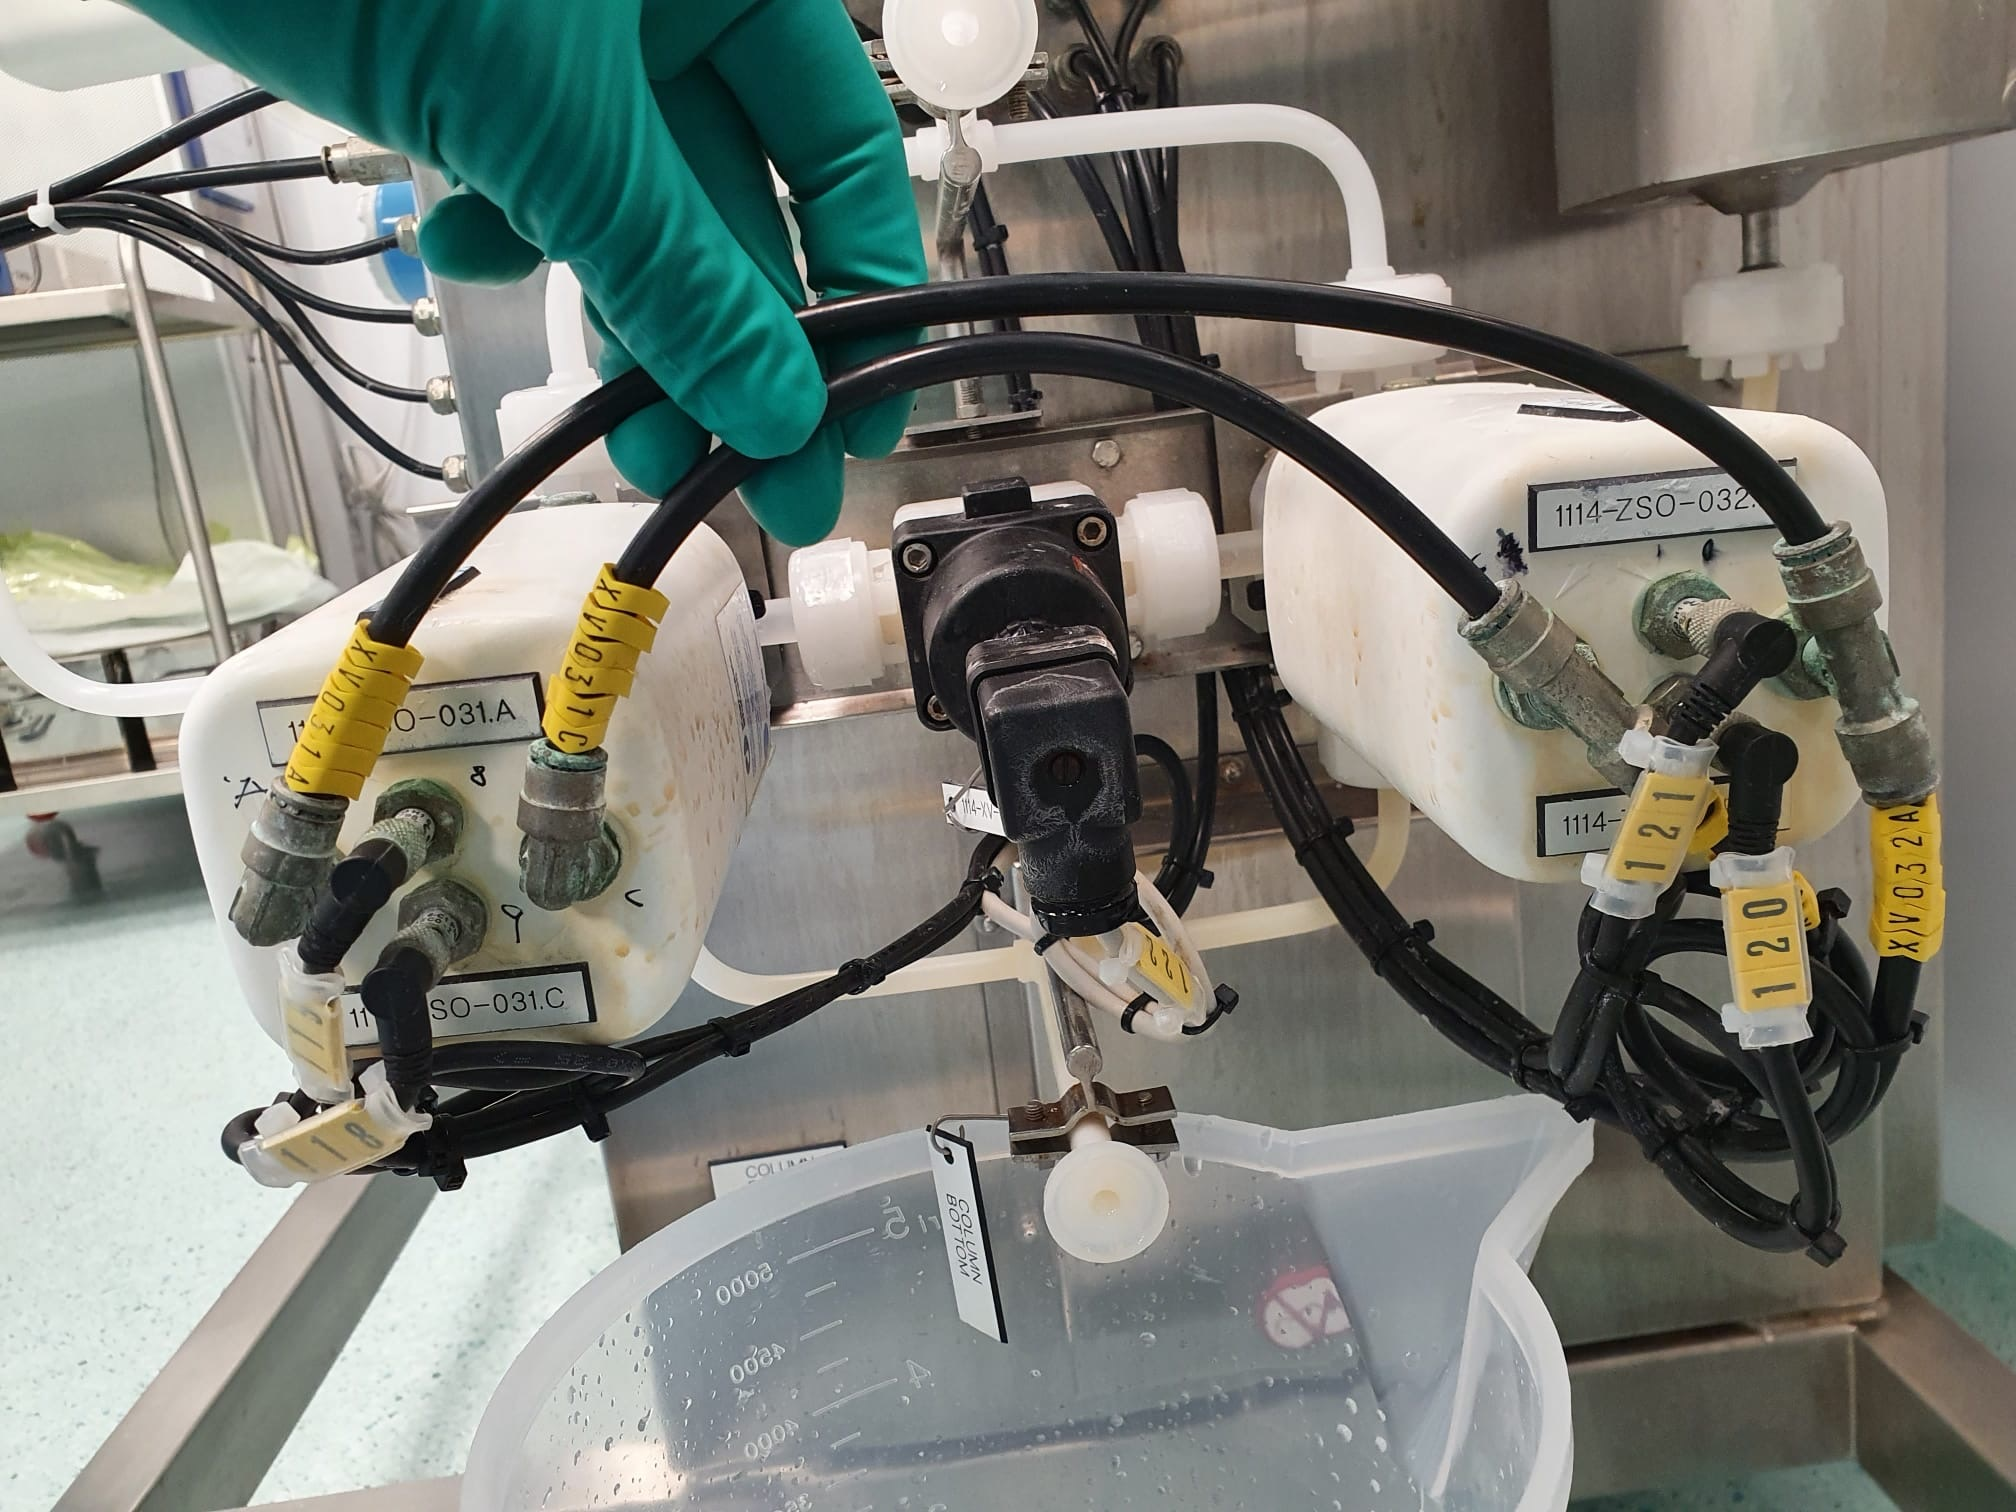 Diagnosis: two air tubing connections in the customer’s BioProcess™ chromatography machine had been accidentally reversed.